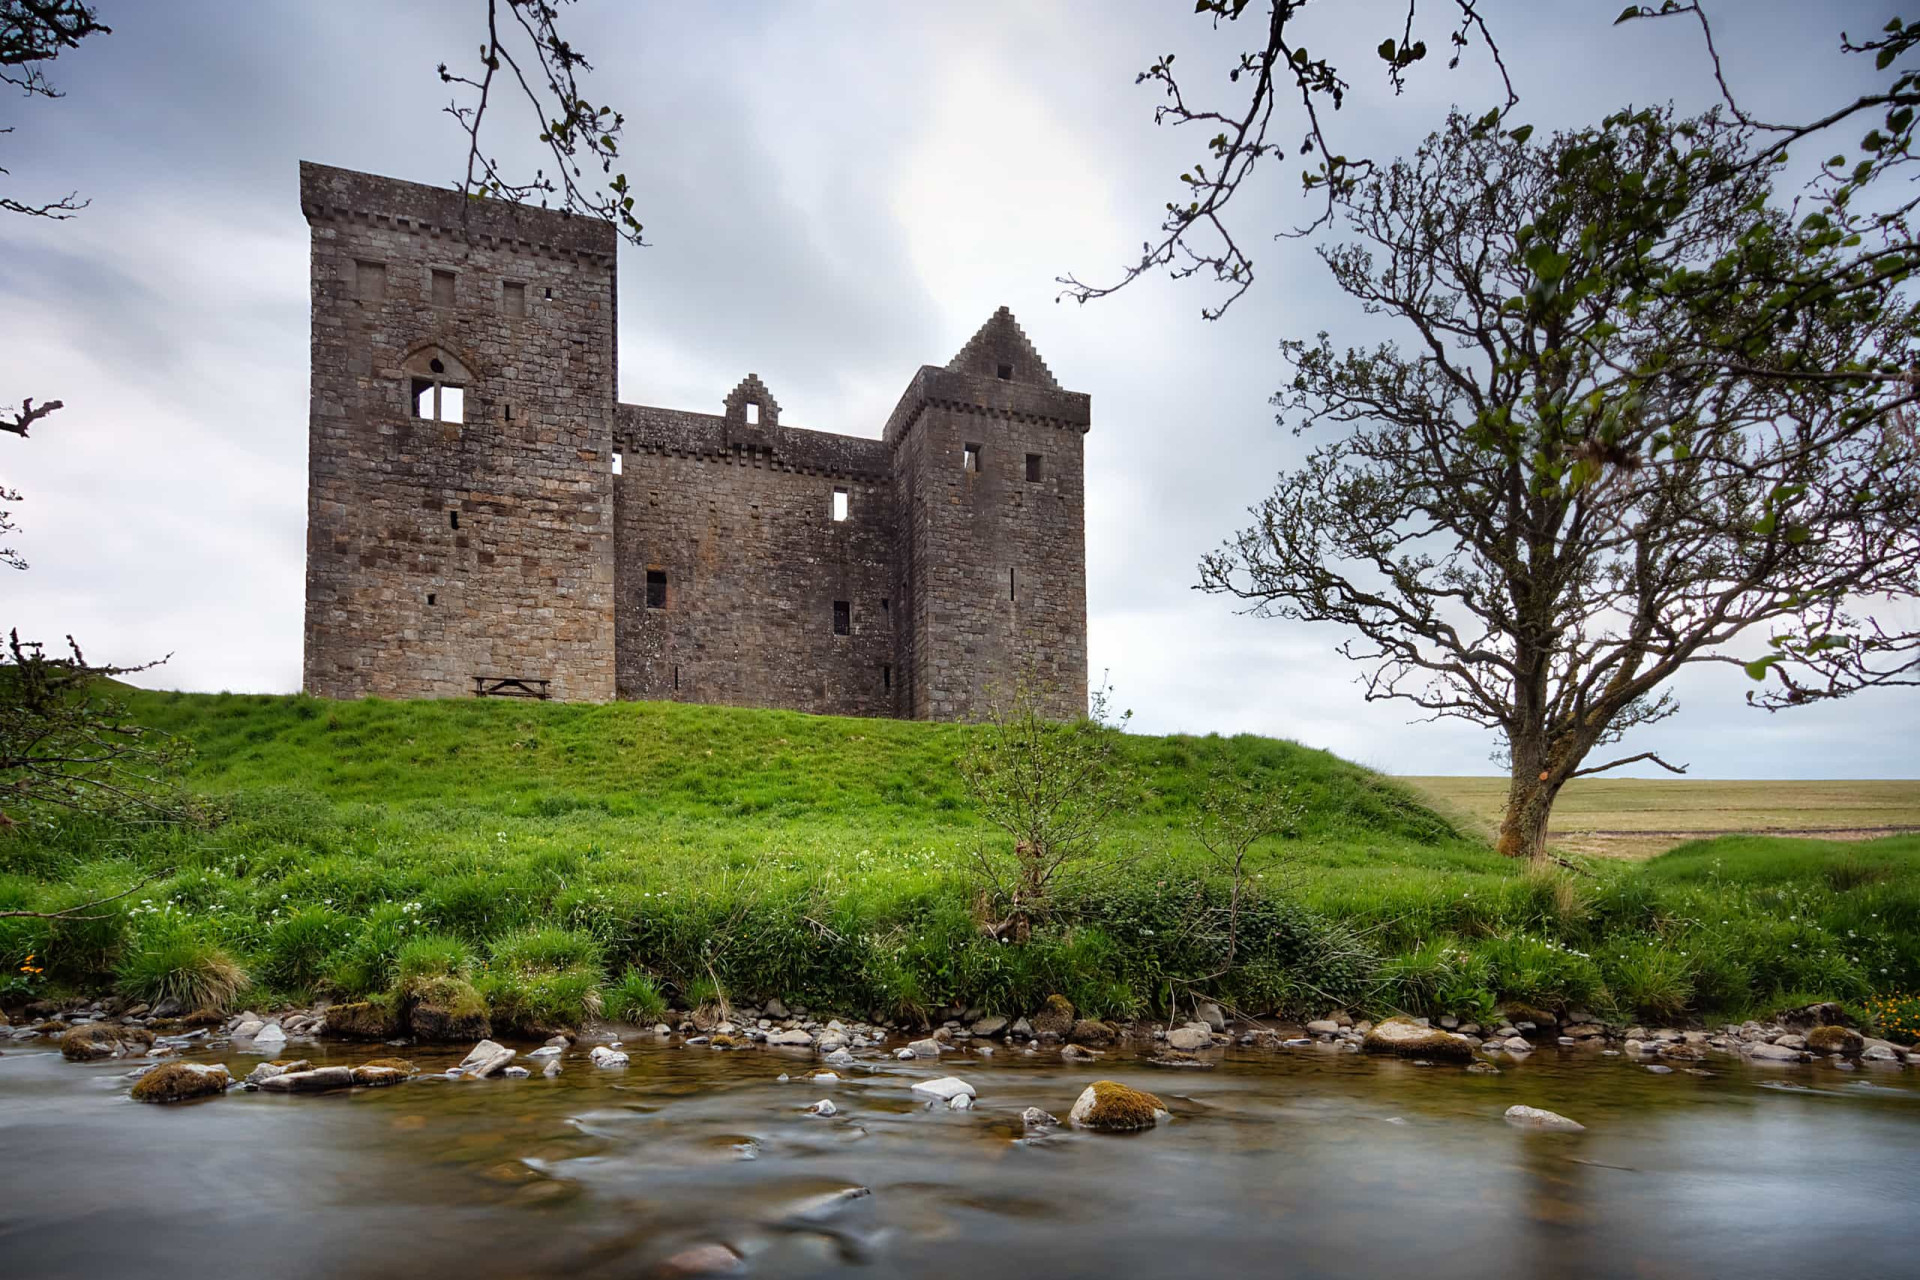 <p>The foreboding exterior of Hermitage Castle in Hawick casts an appropriately dark air over this 13th-century site. Built to control border access between frequently-warring Scotland and England, it was said to overlook "the bloodiest valley in Britain." </p><p><a href="https://www.msn.com/en-ca/community/channel/vid-7xx8mnucu55yw63we9va2gwr7uihbxwc68fxqp25x6tg4ftibpra?cvid=94631541bc0f4f89bfd59158d696ad7e">Follow us and access great exclusive content every day</a></p>